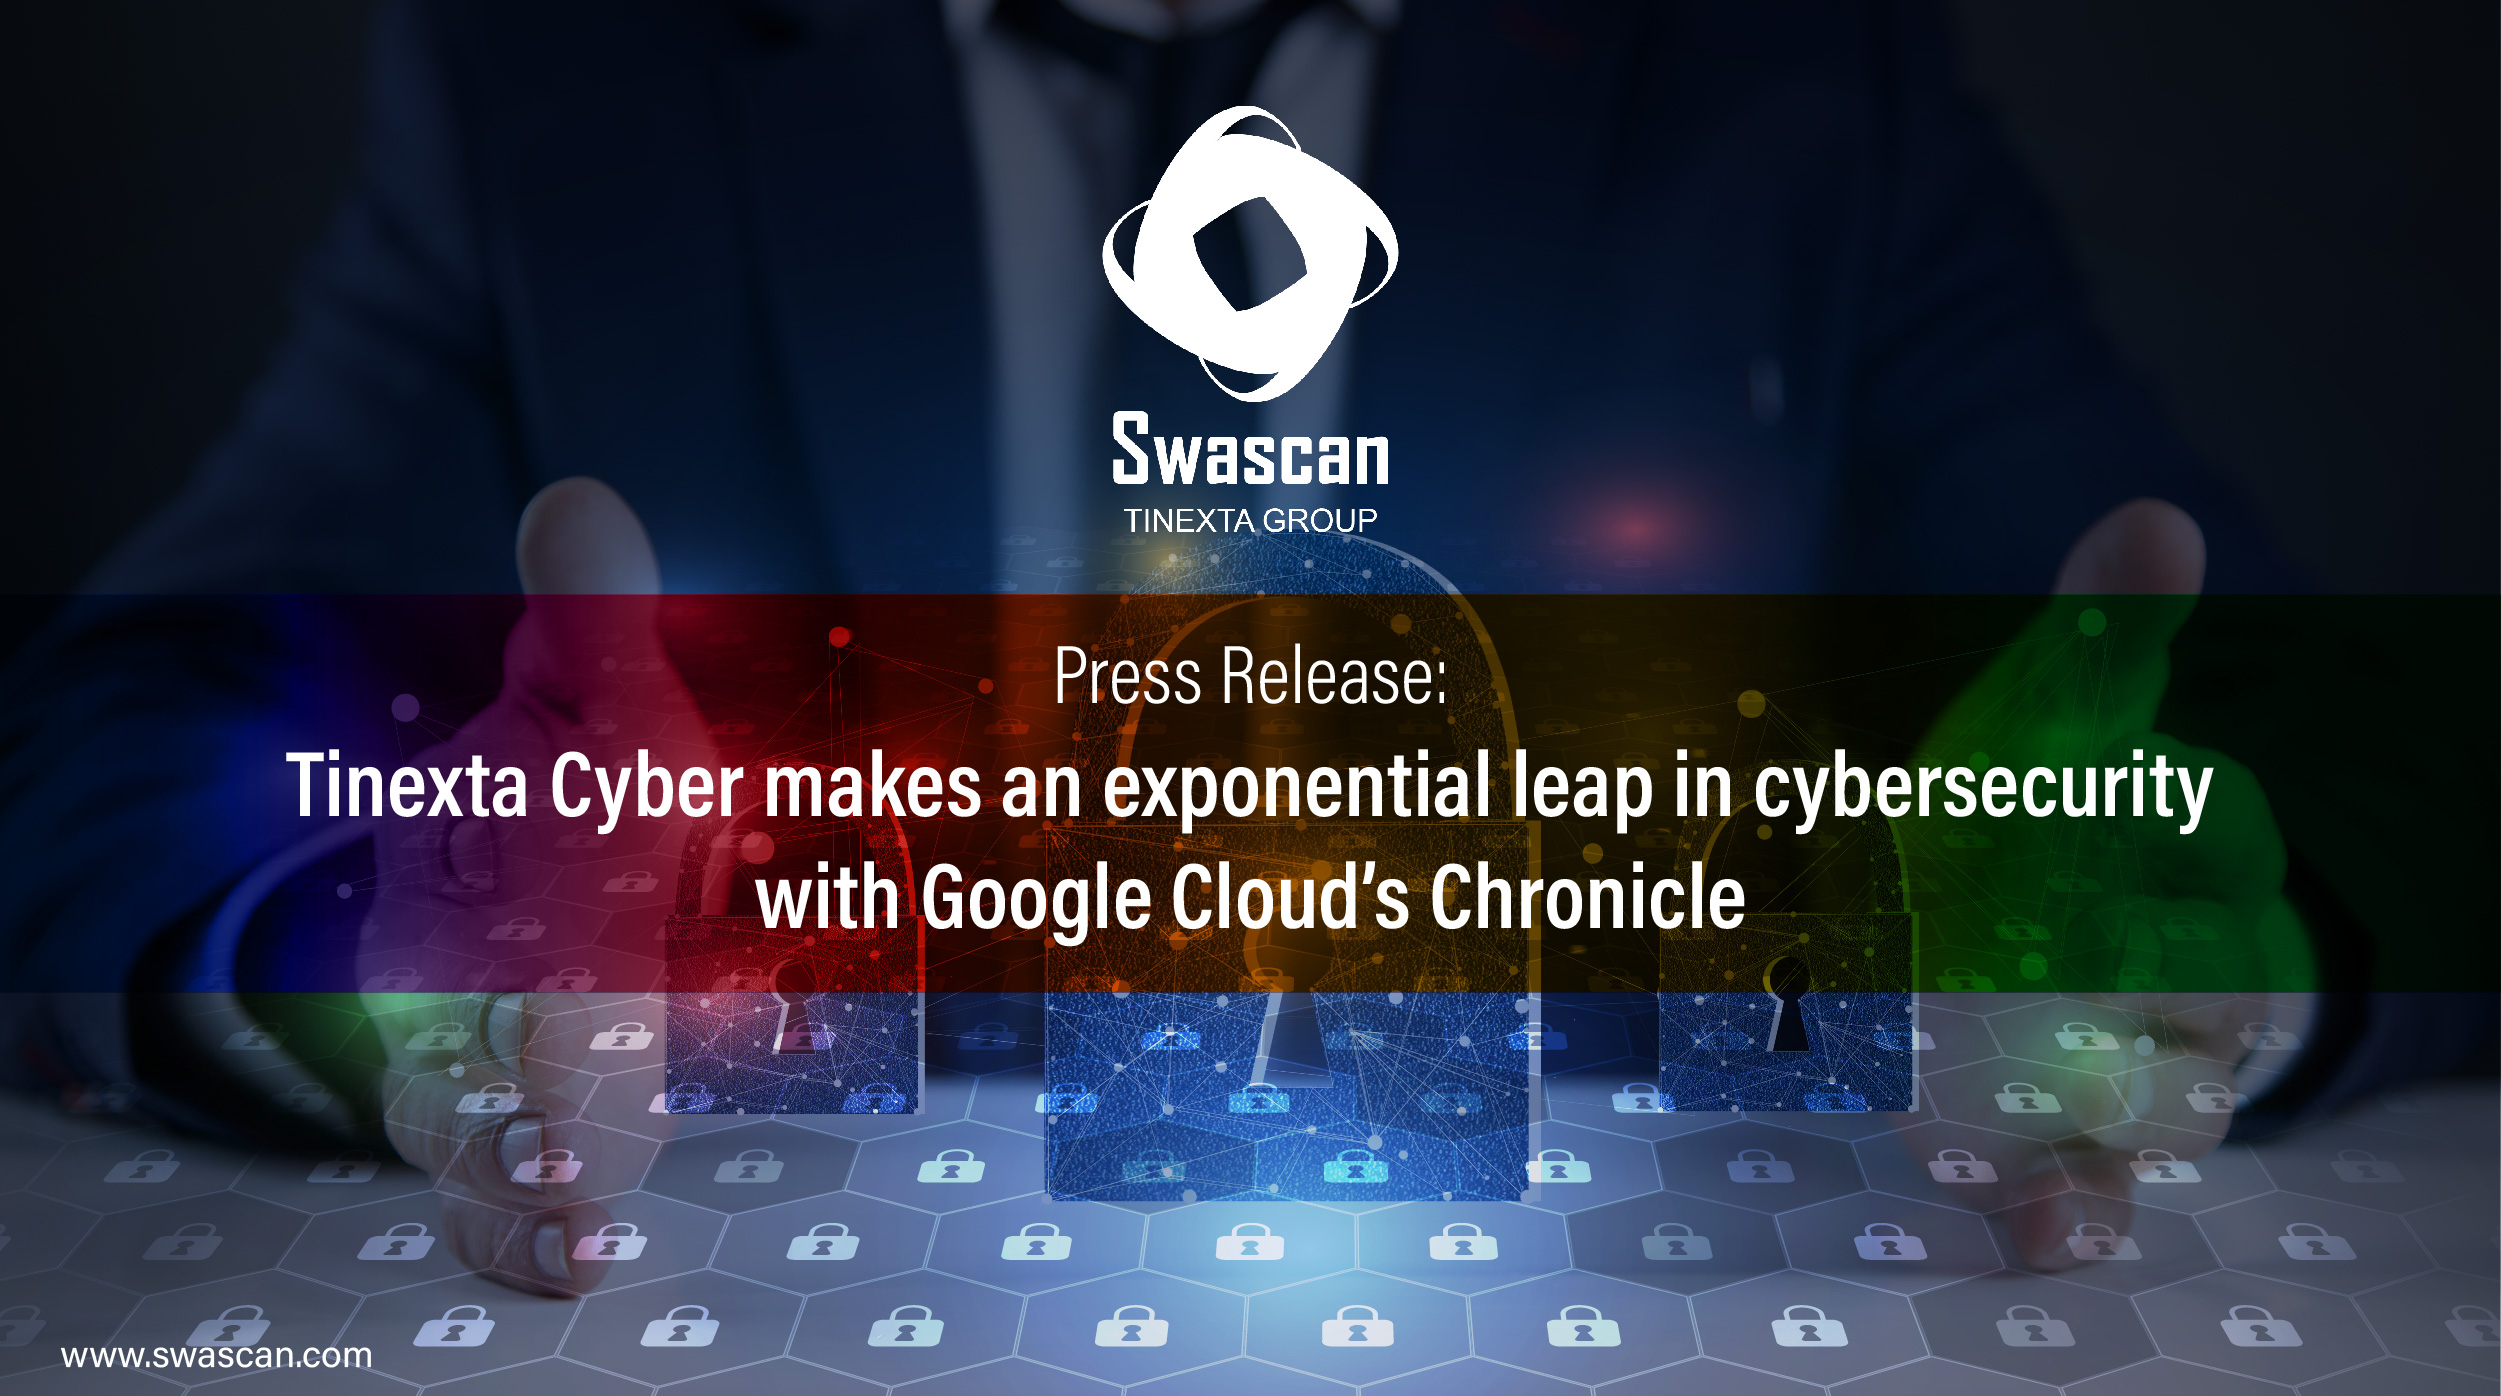 Press release: Tinexta Cyber makes an exponential leap in cybersecurity with Google Cloud’s Chronicle